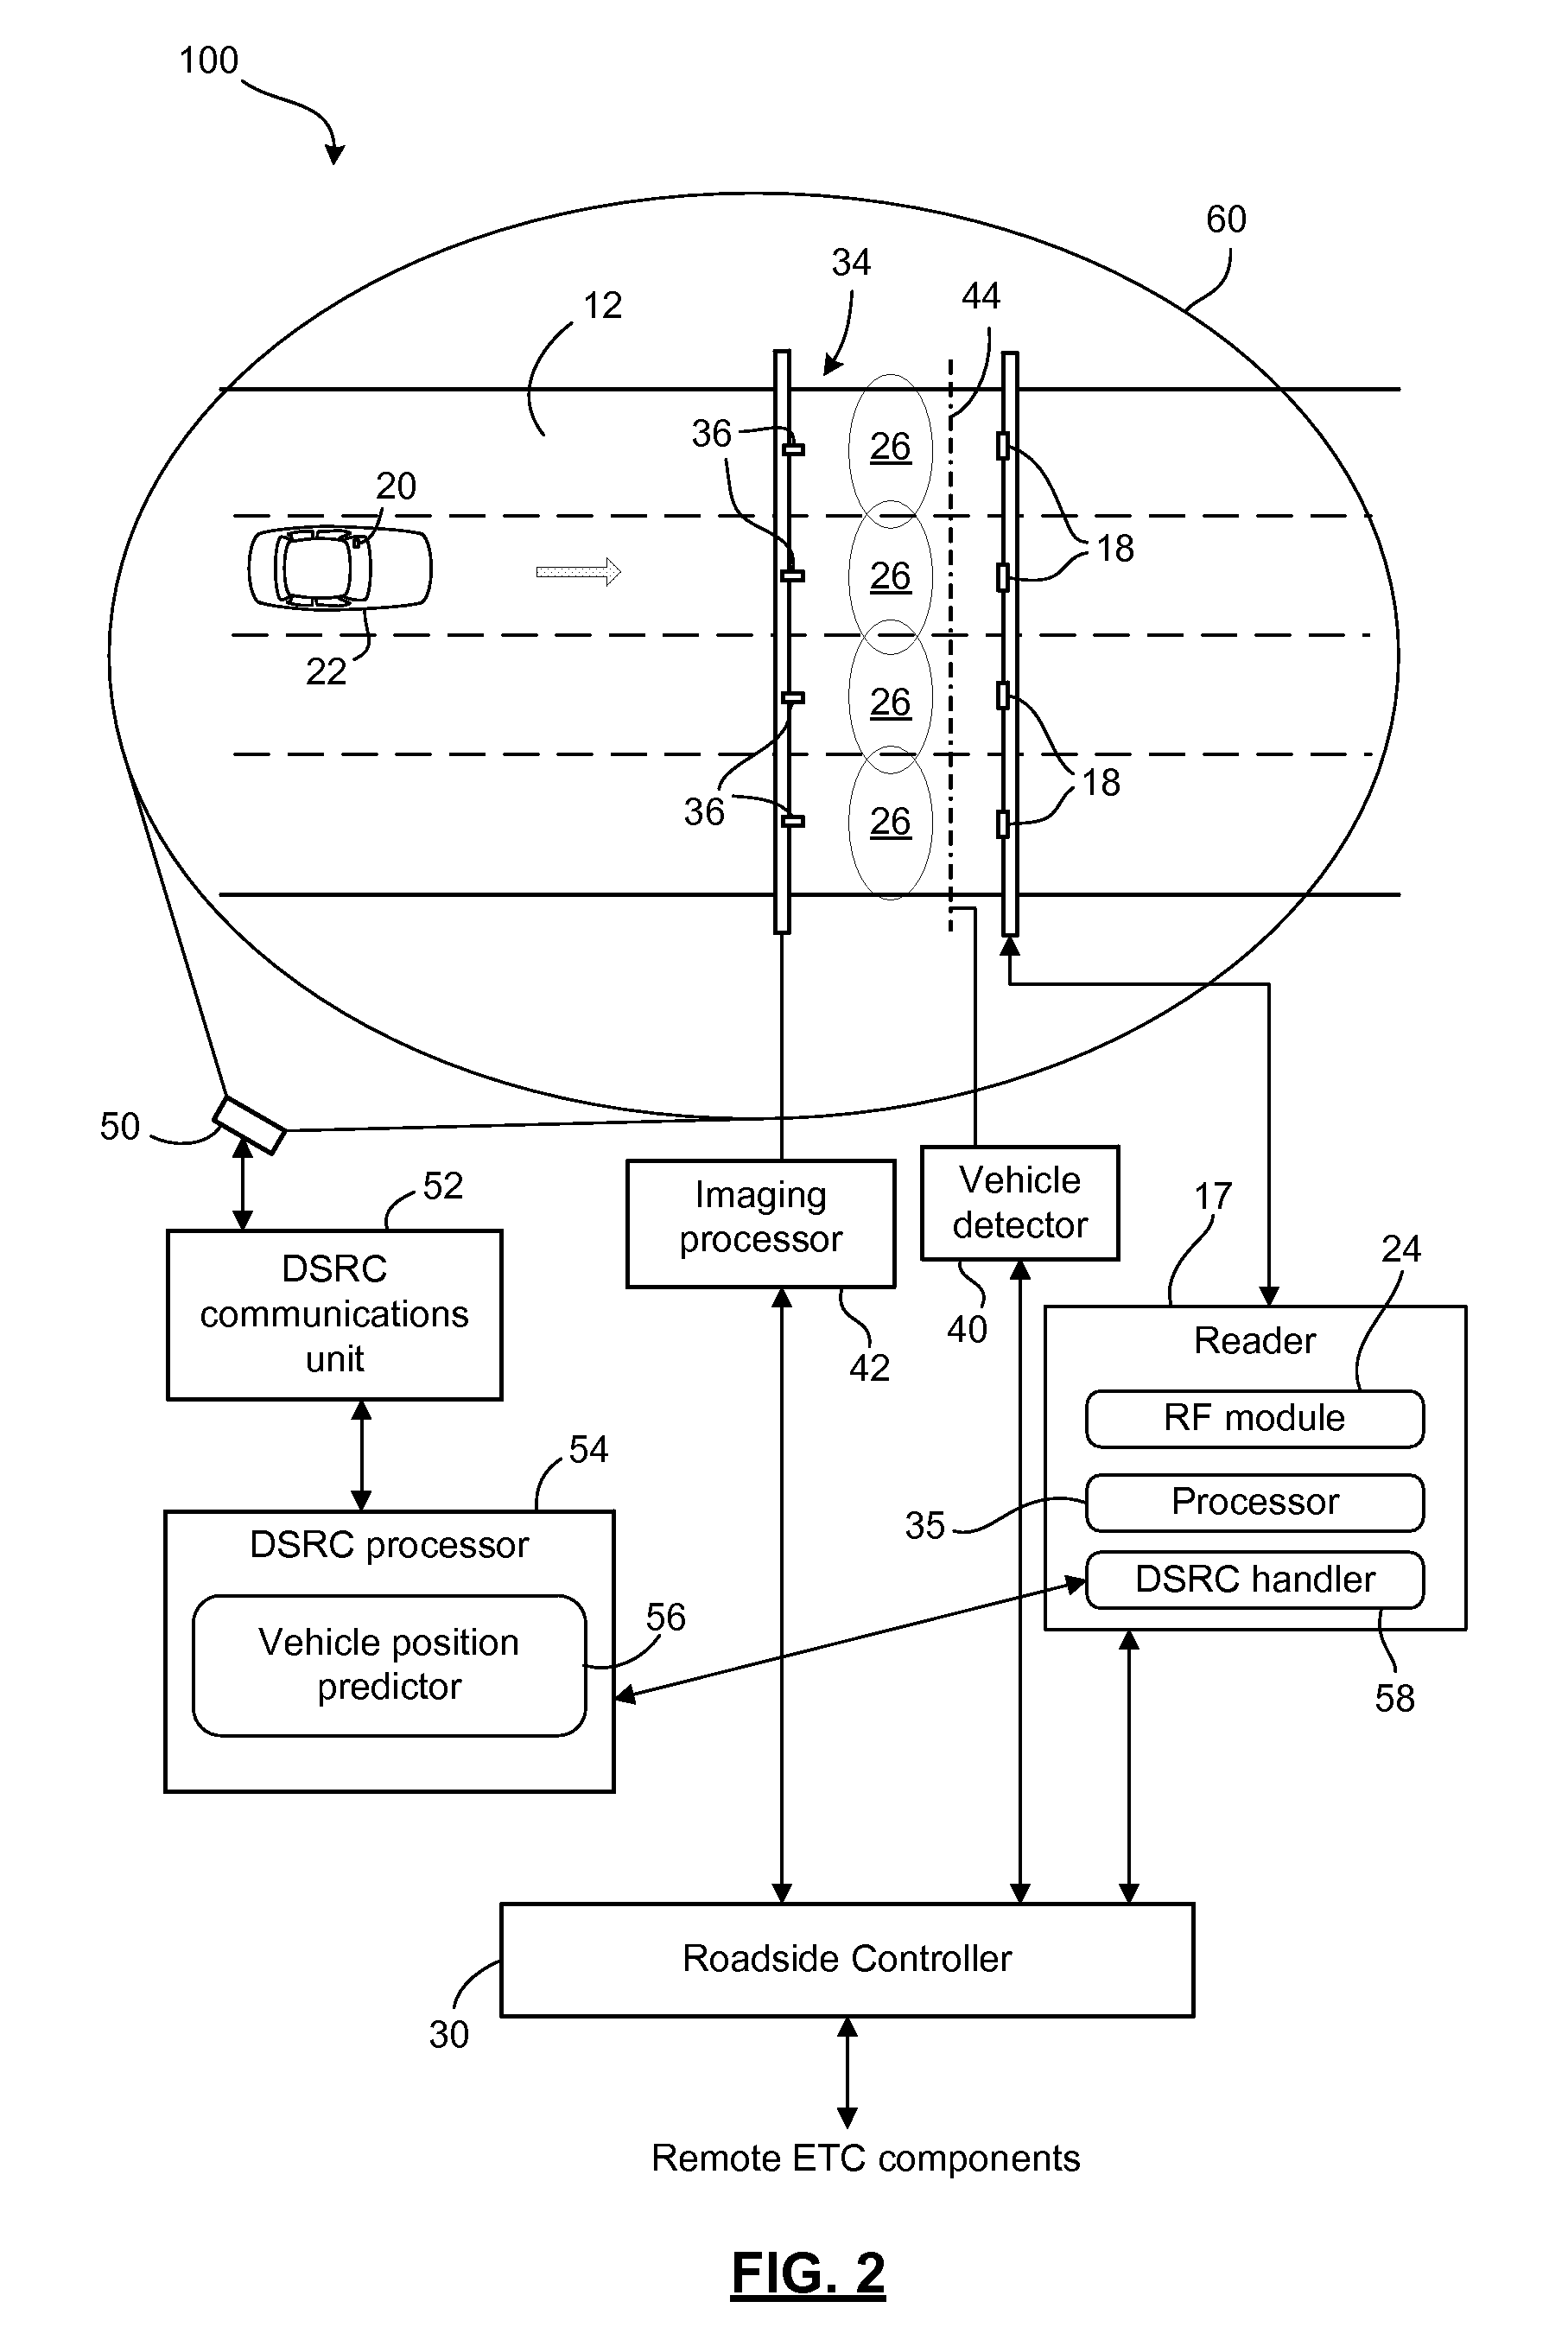 Real-time vehicle position determination using communications with variable latency